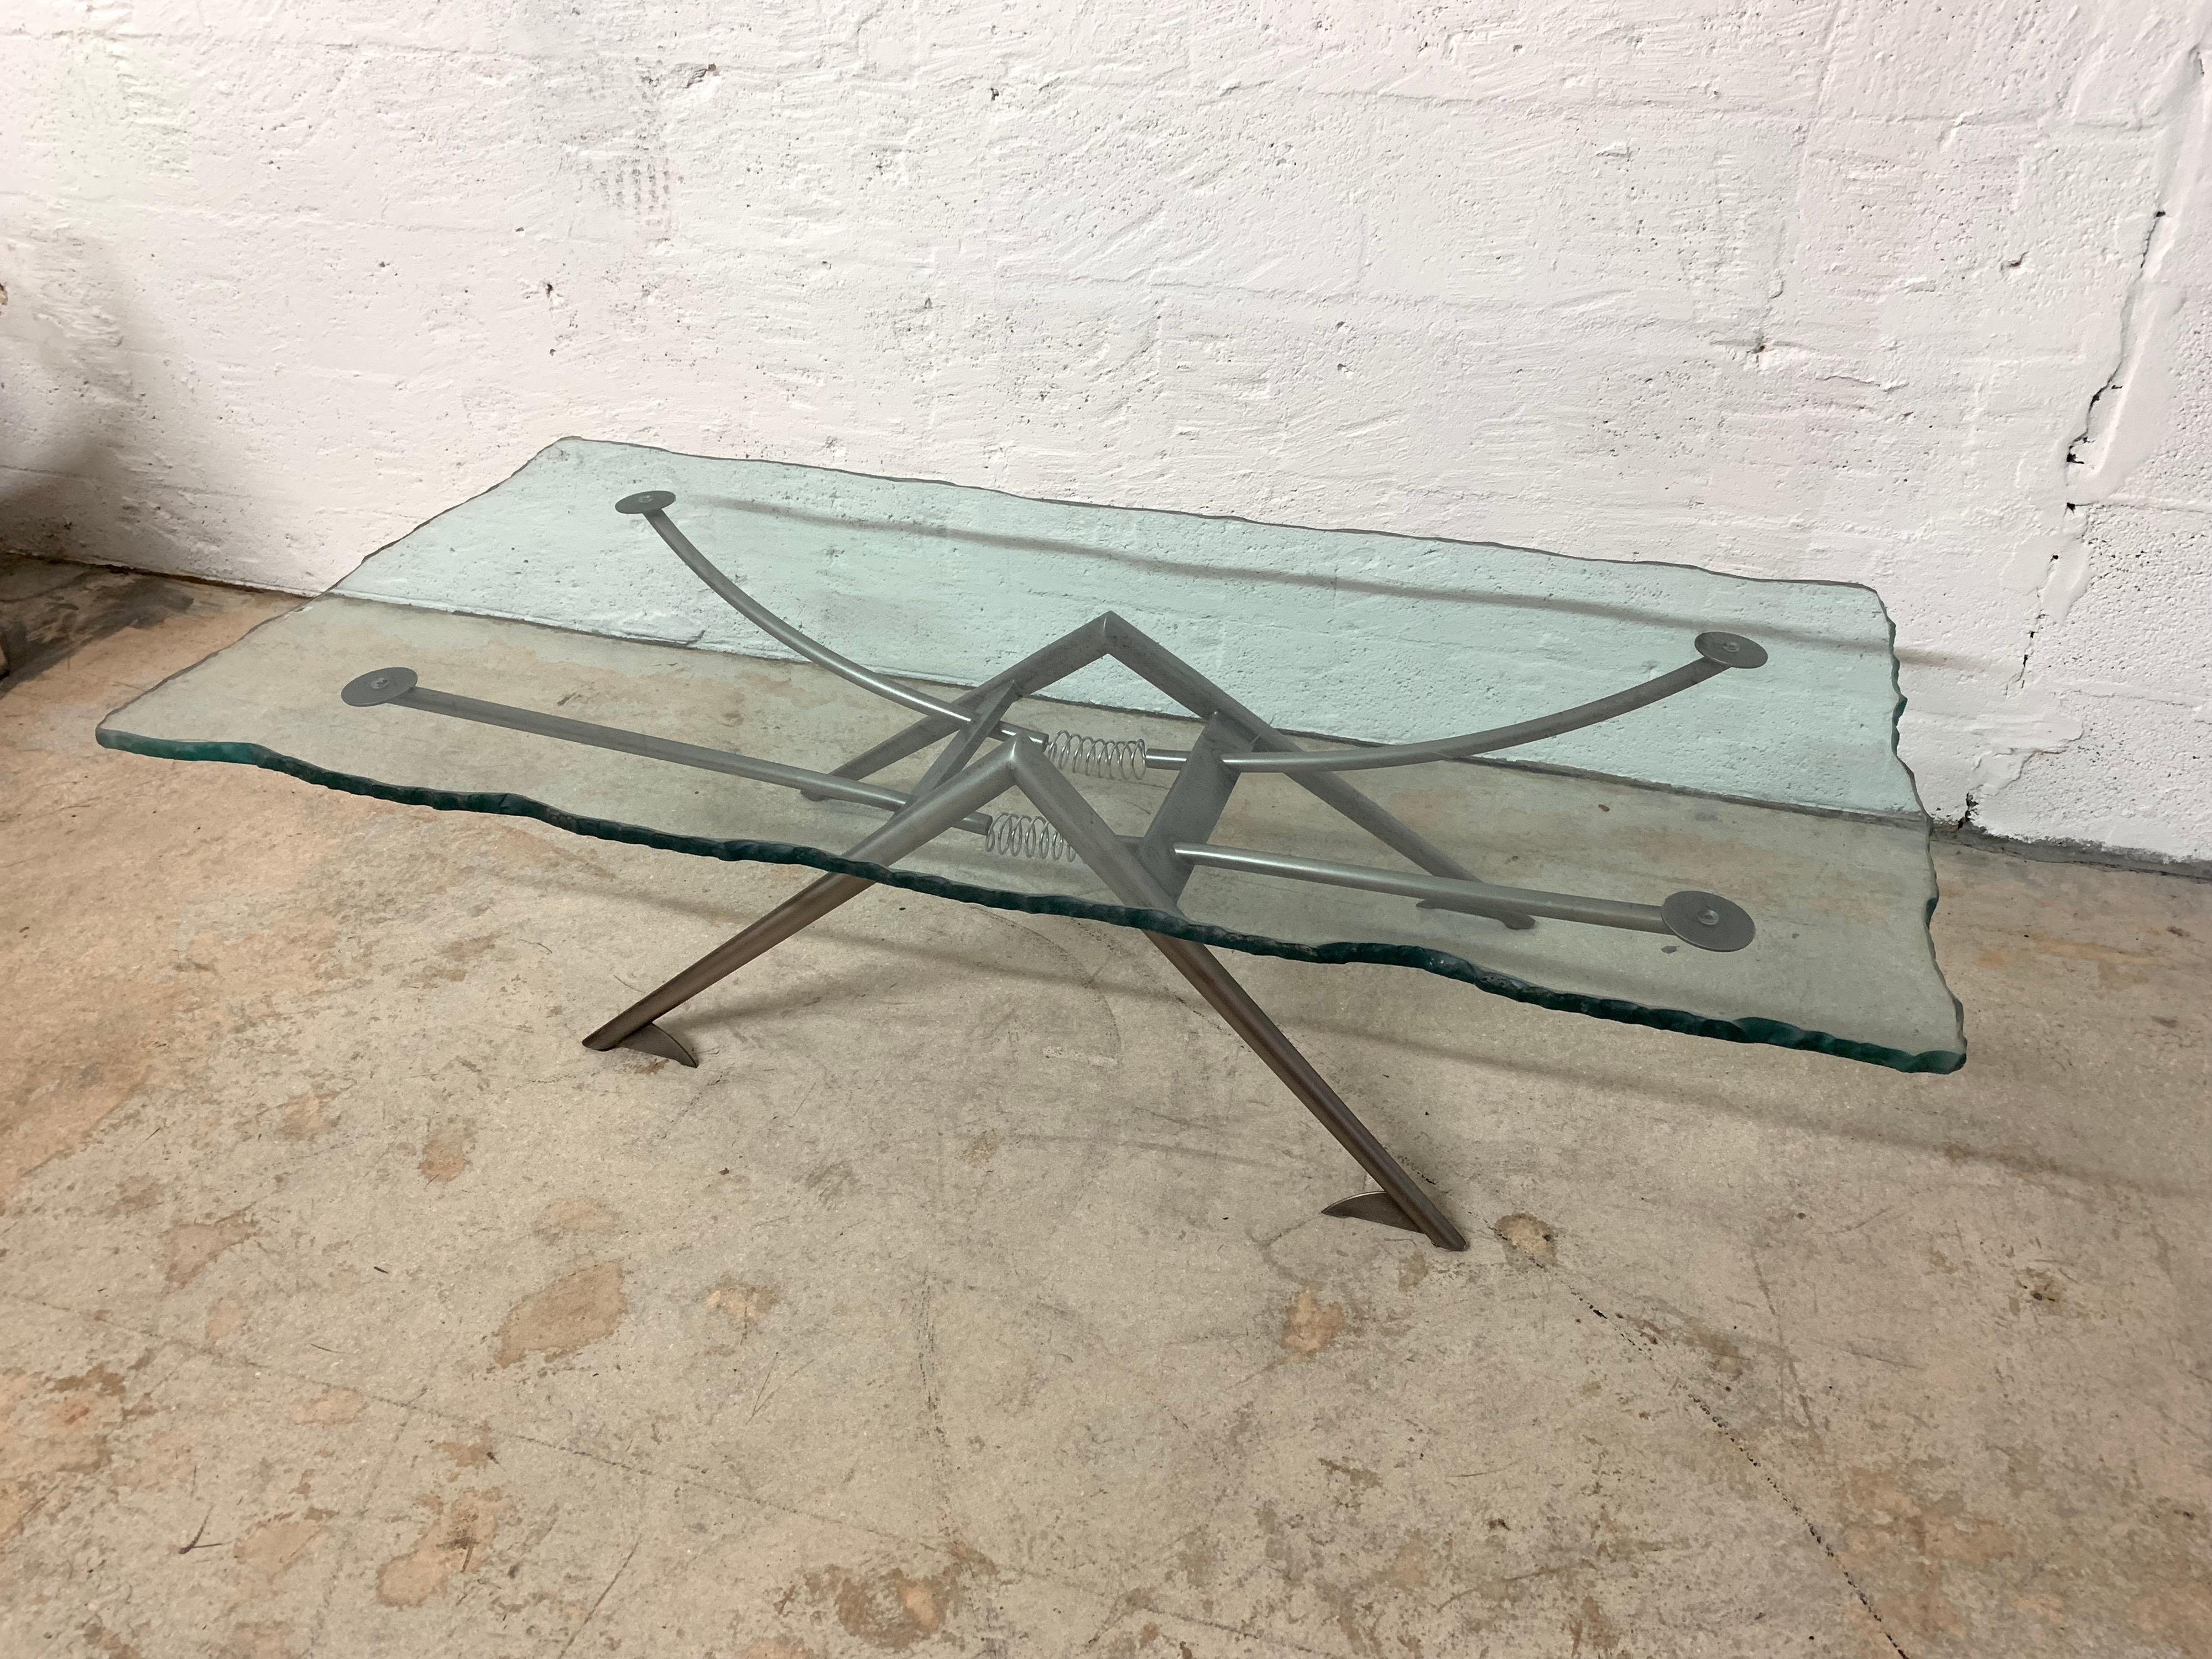 Post Modern coffee or cocktail table inspired by San Francisco Earthquake, comprised of steel armature base and a sandblasted chiseled edge glass top, designed by Rick Lee for DIA, Design Institute of America, USA, circa 1989.